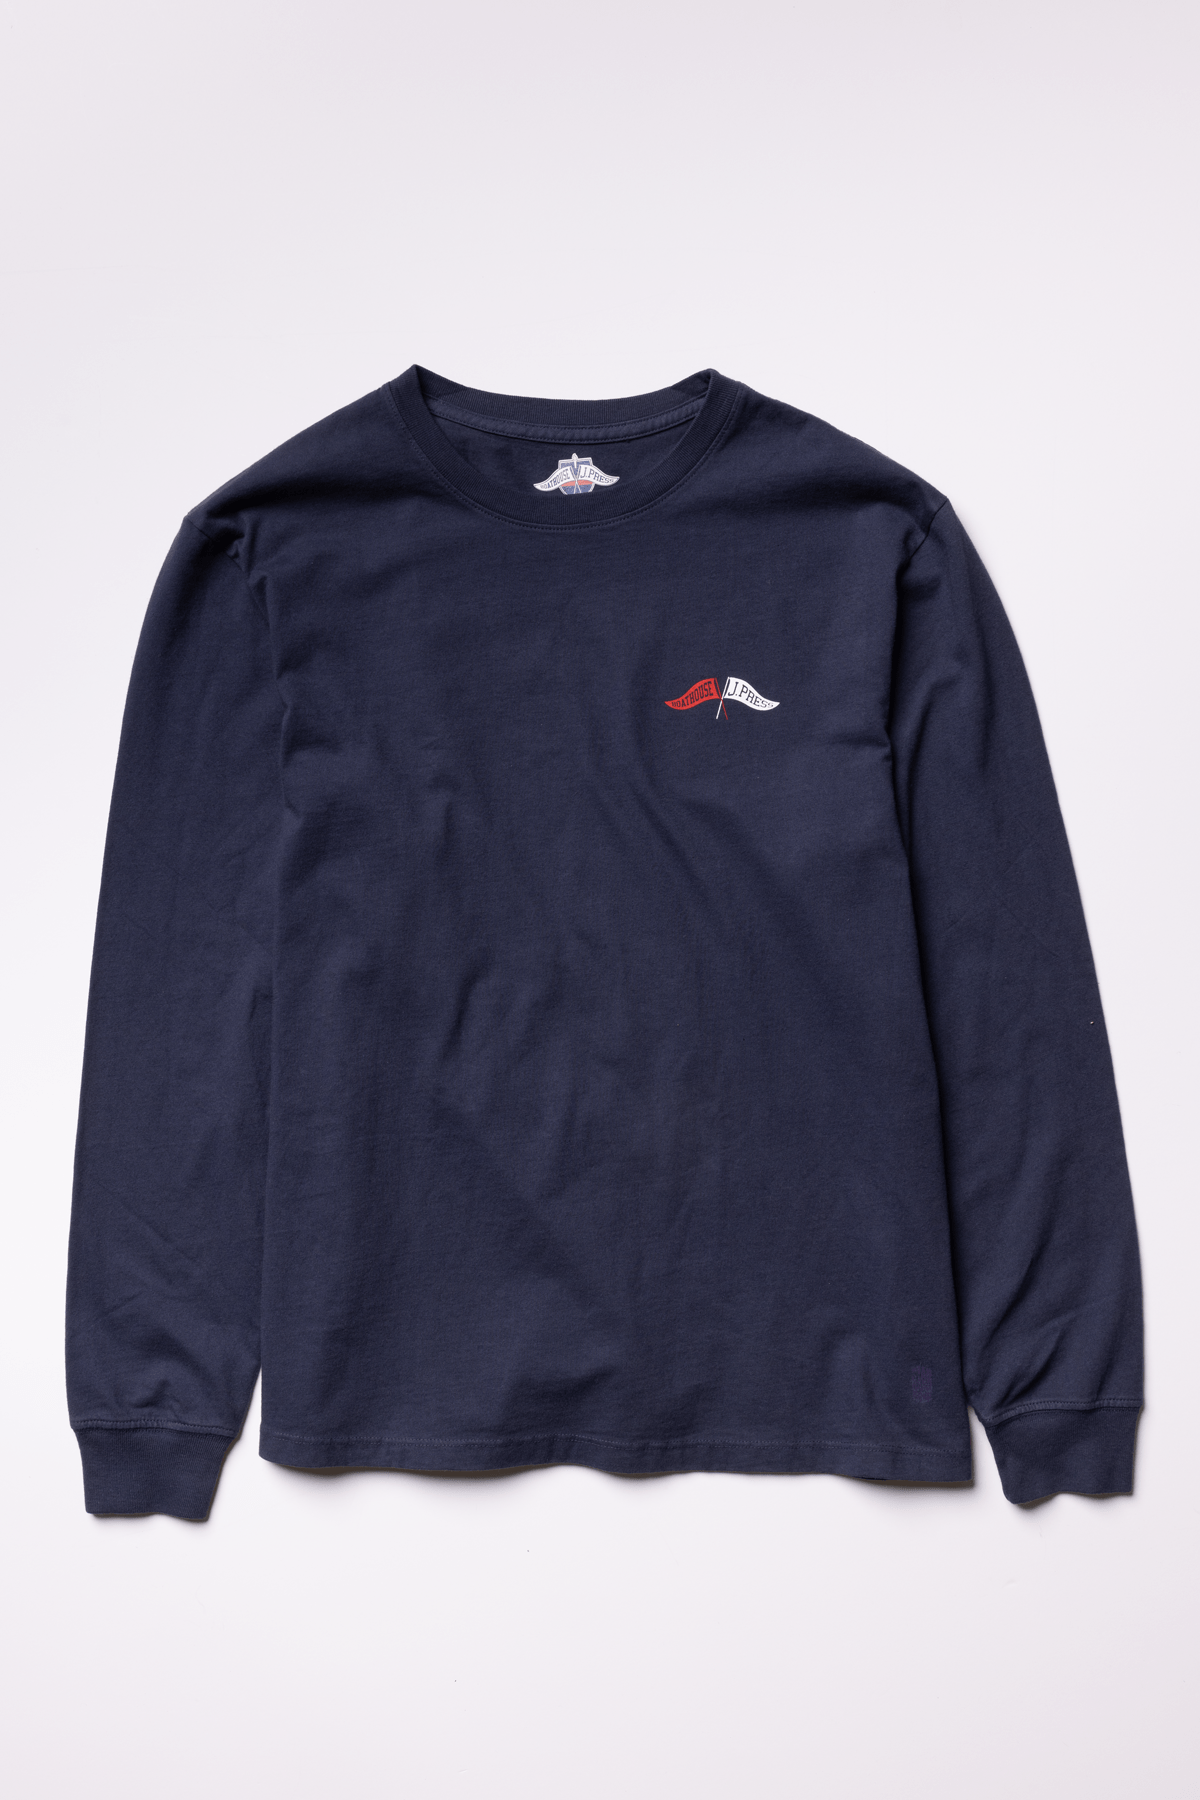 Boathouse x J.Press Rugby cOTTON Long Sleeve Shirt Navy / Small